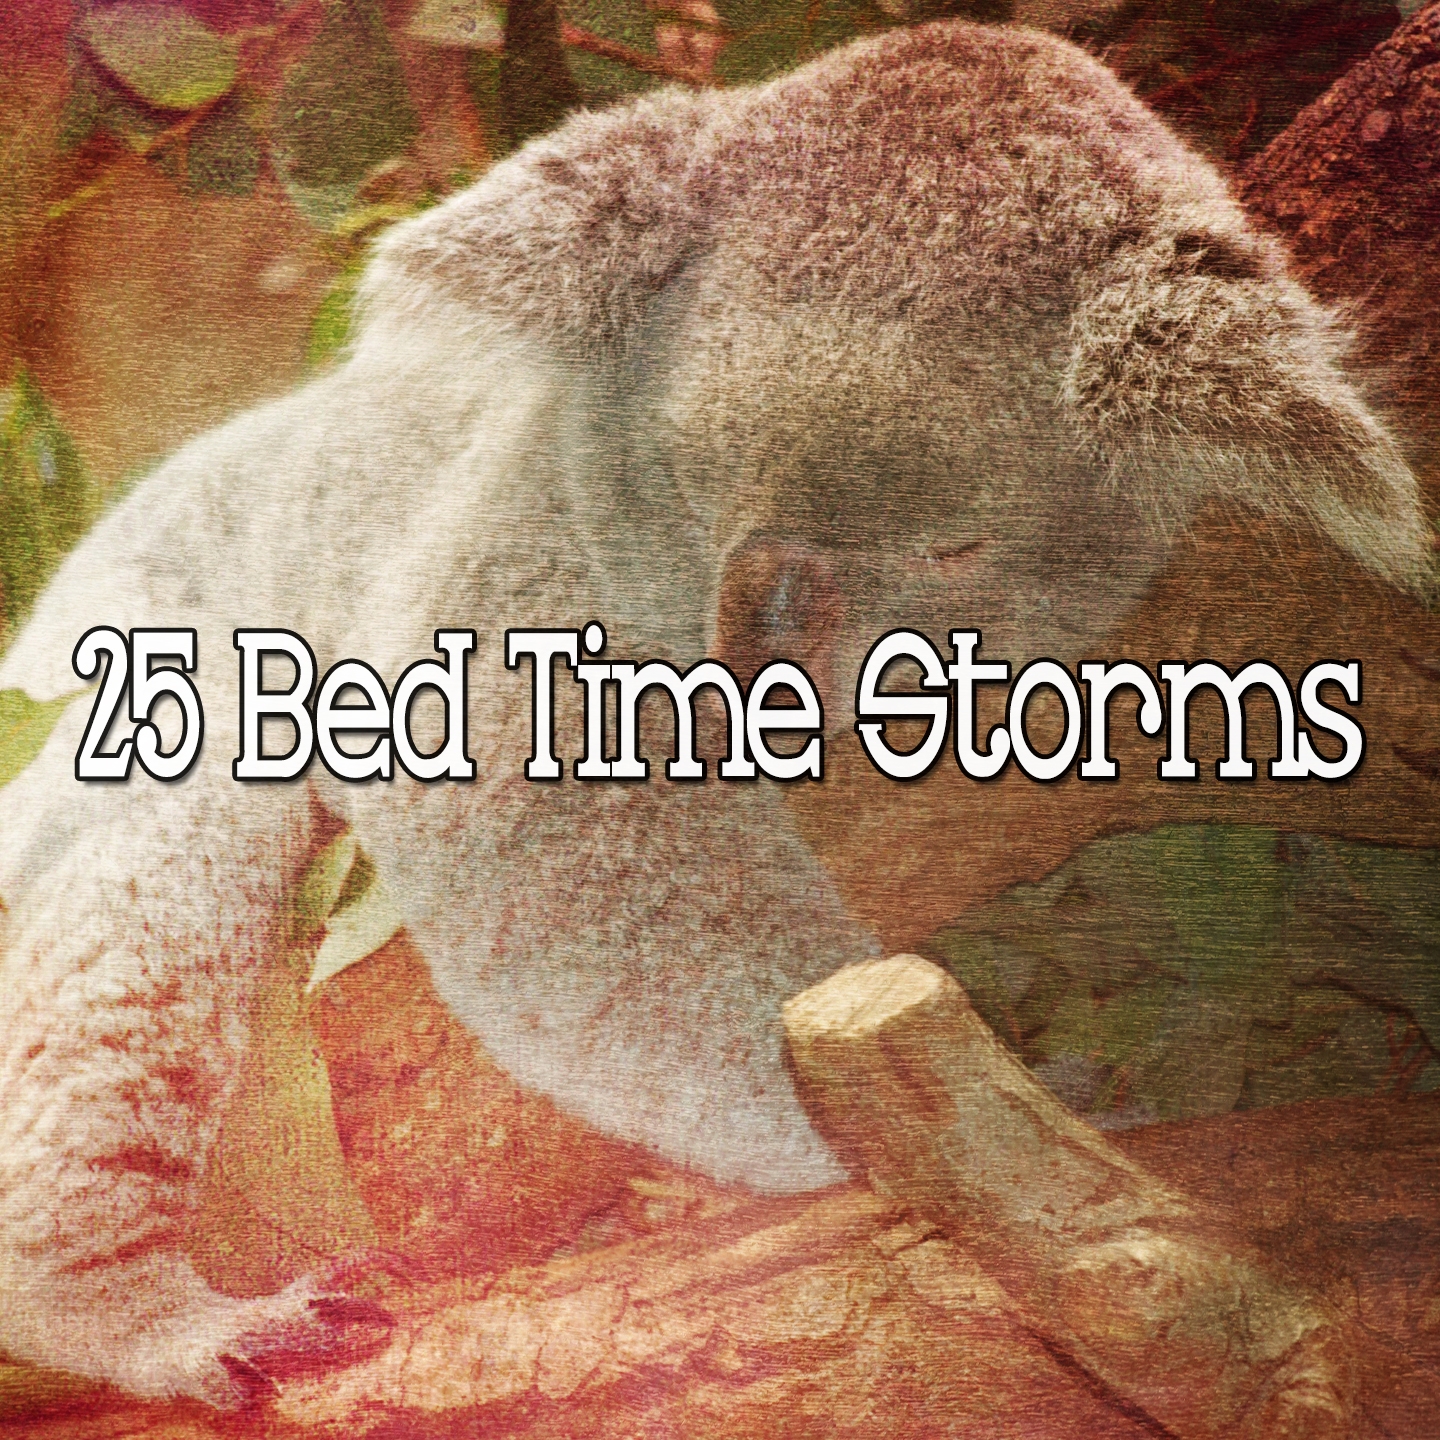 25 Bed Time Storms